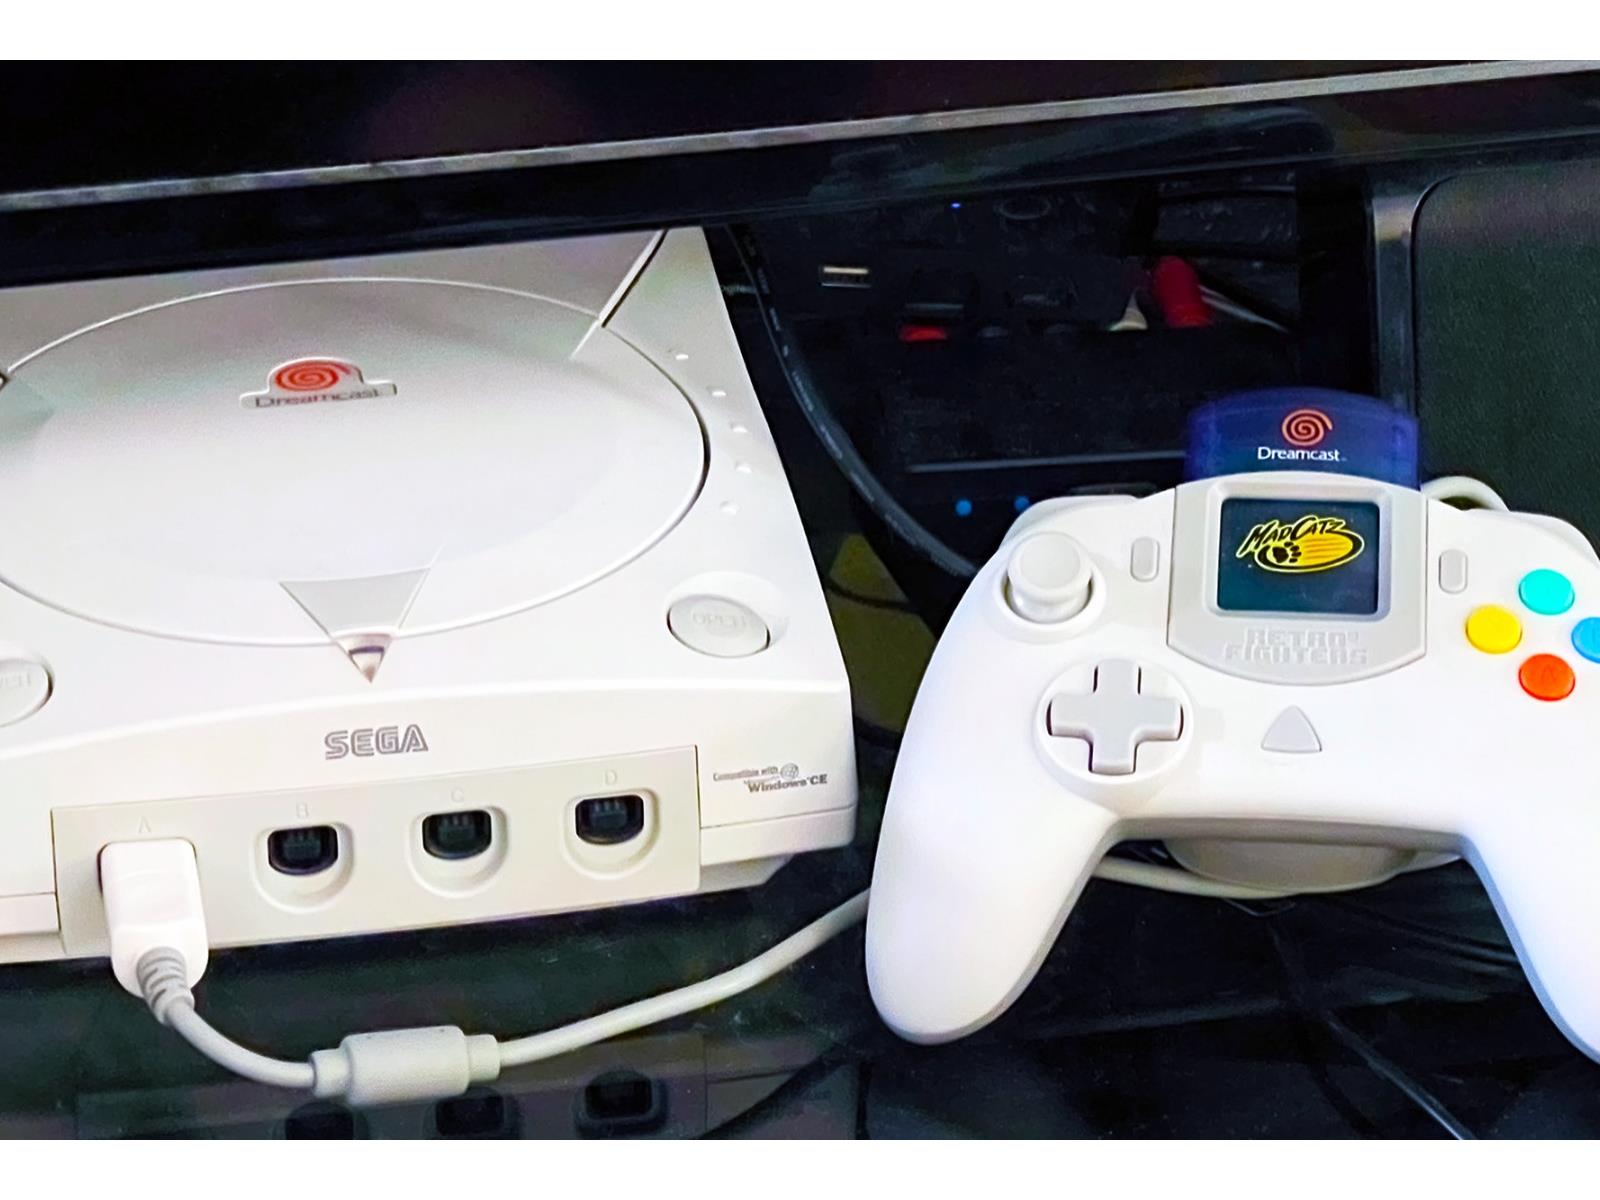 Complete Guide To Retro Gaming In 2021: The Best Consoles